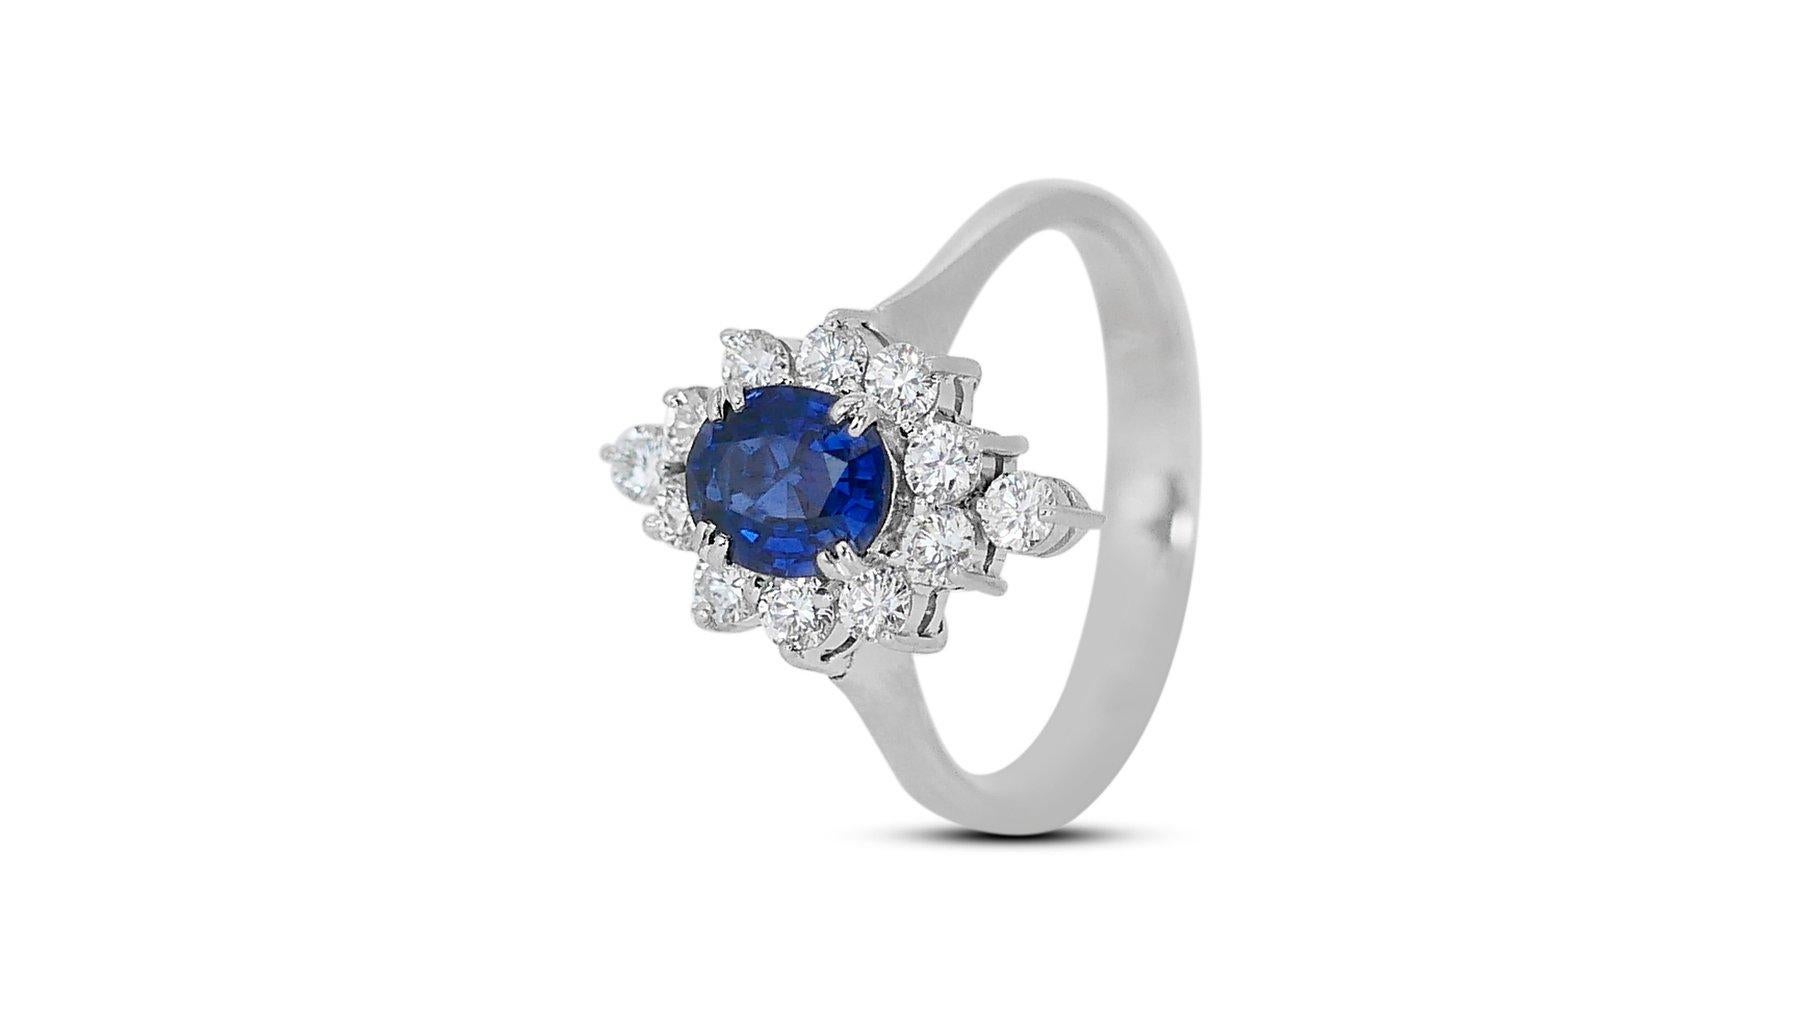 Oval Cut Lovely 1.37 carat oval natural sapphire ring in 18K white gold